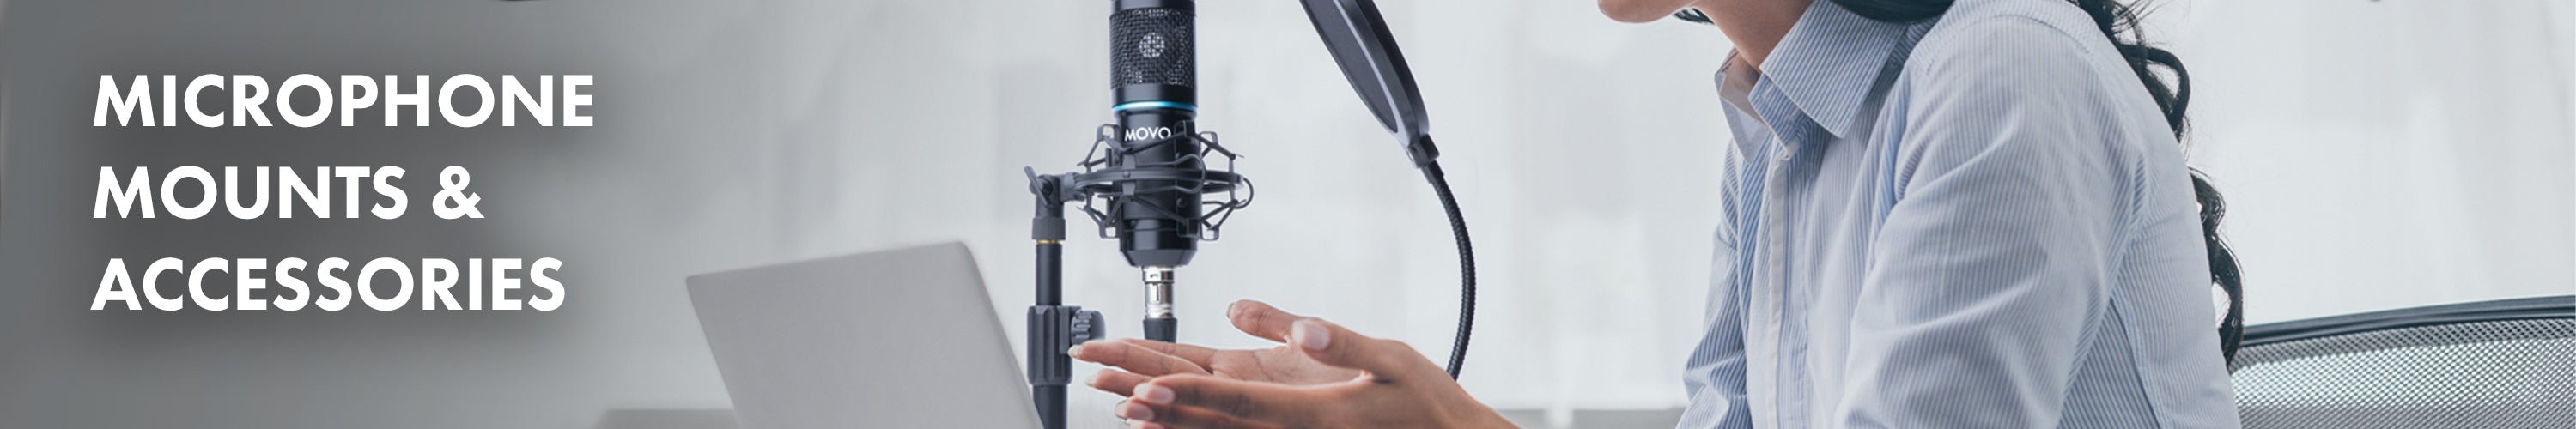 Microphone Accessories & Mounts - Movo